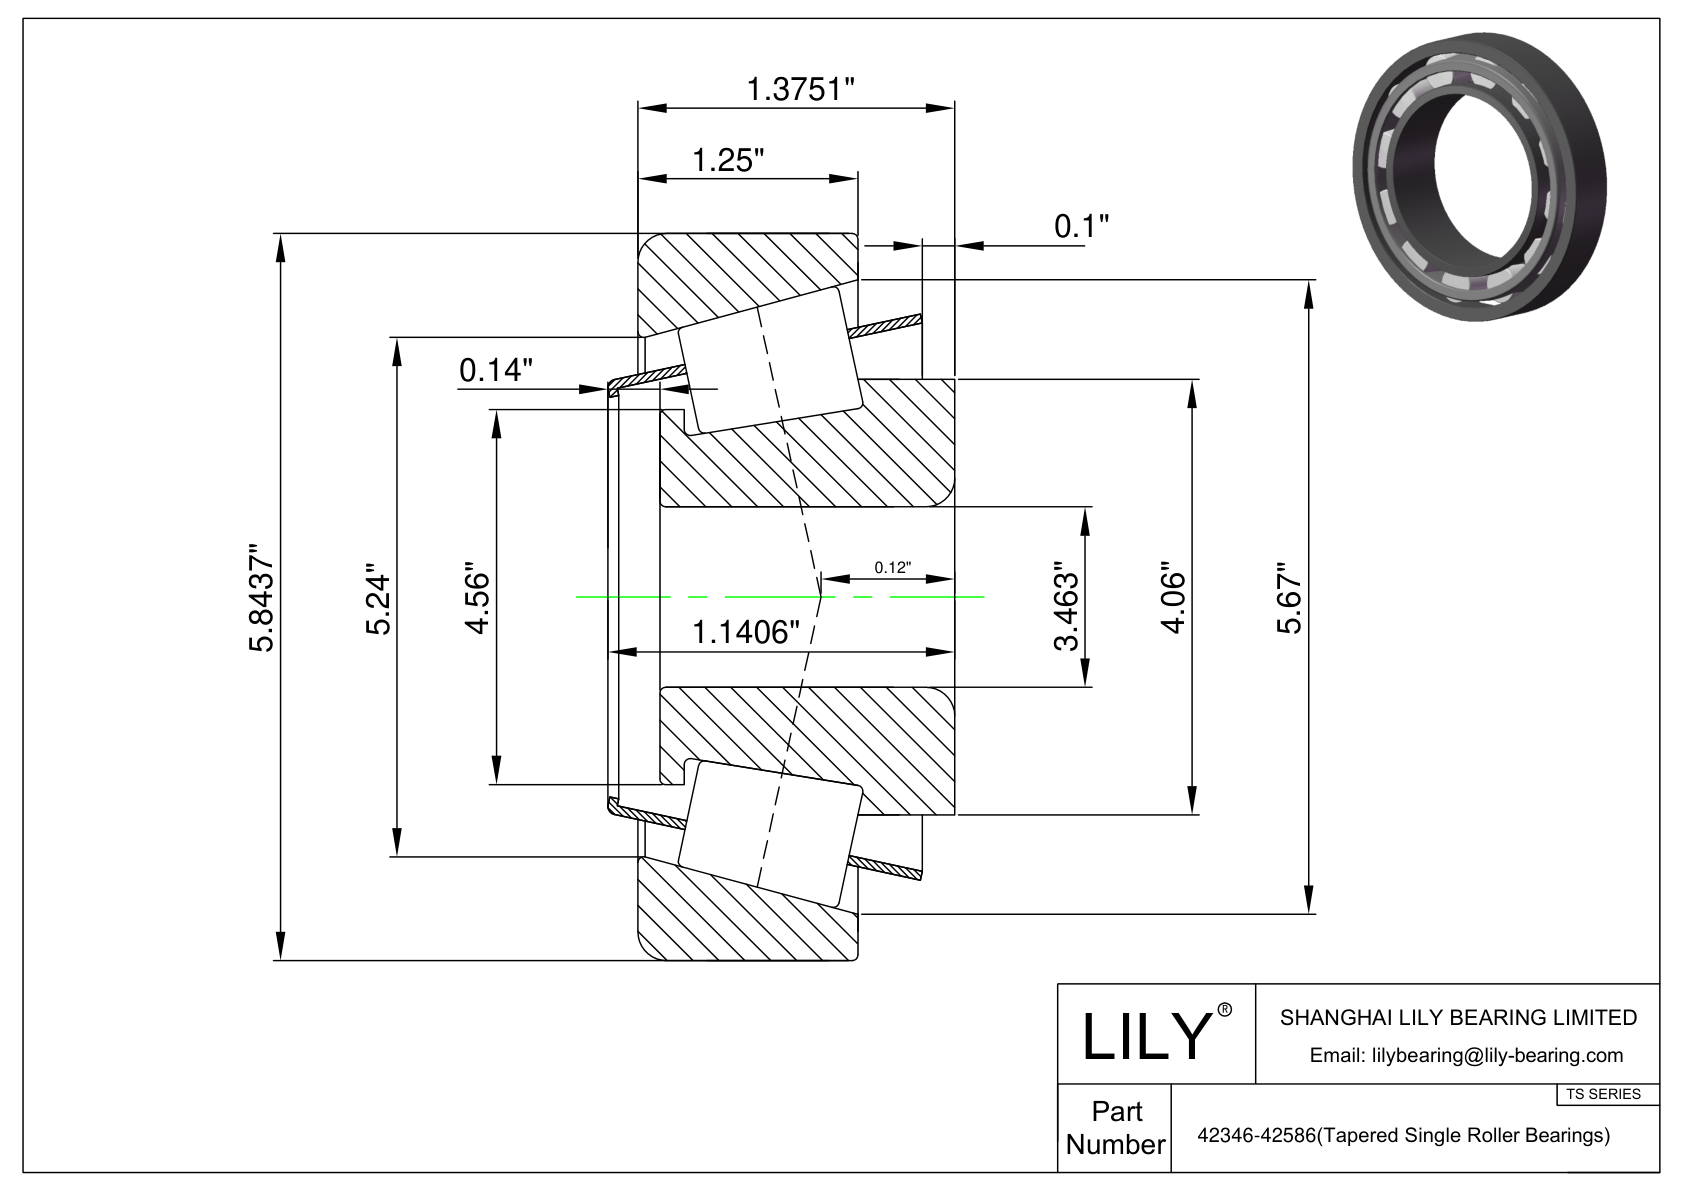 42346-42586 TS (Tapered Single Roller Bearings) (Imperial) cad drawing